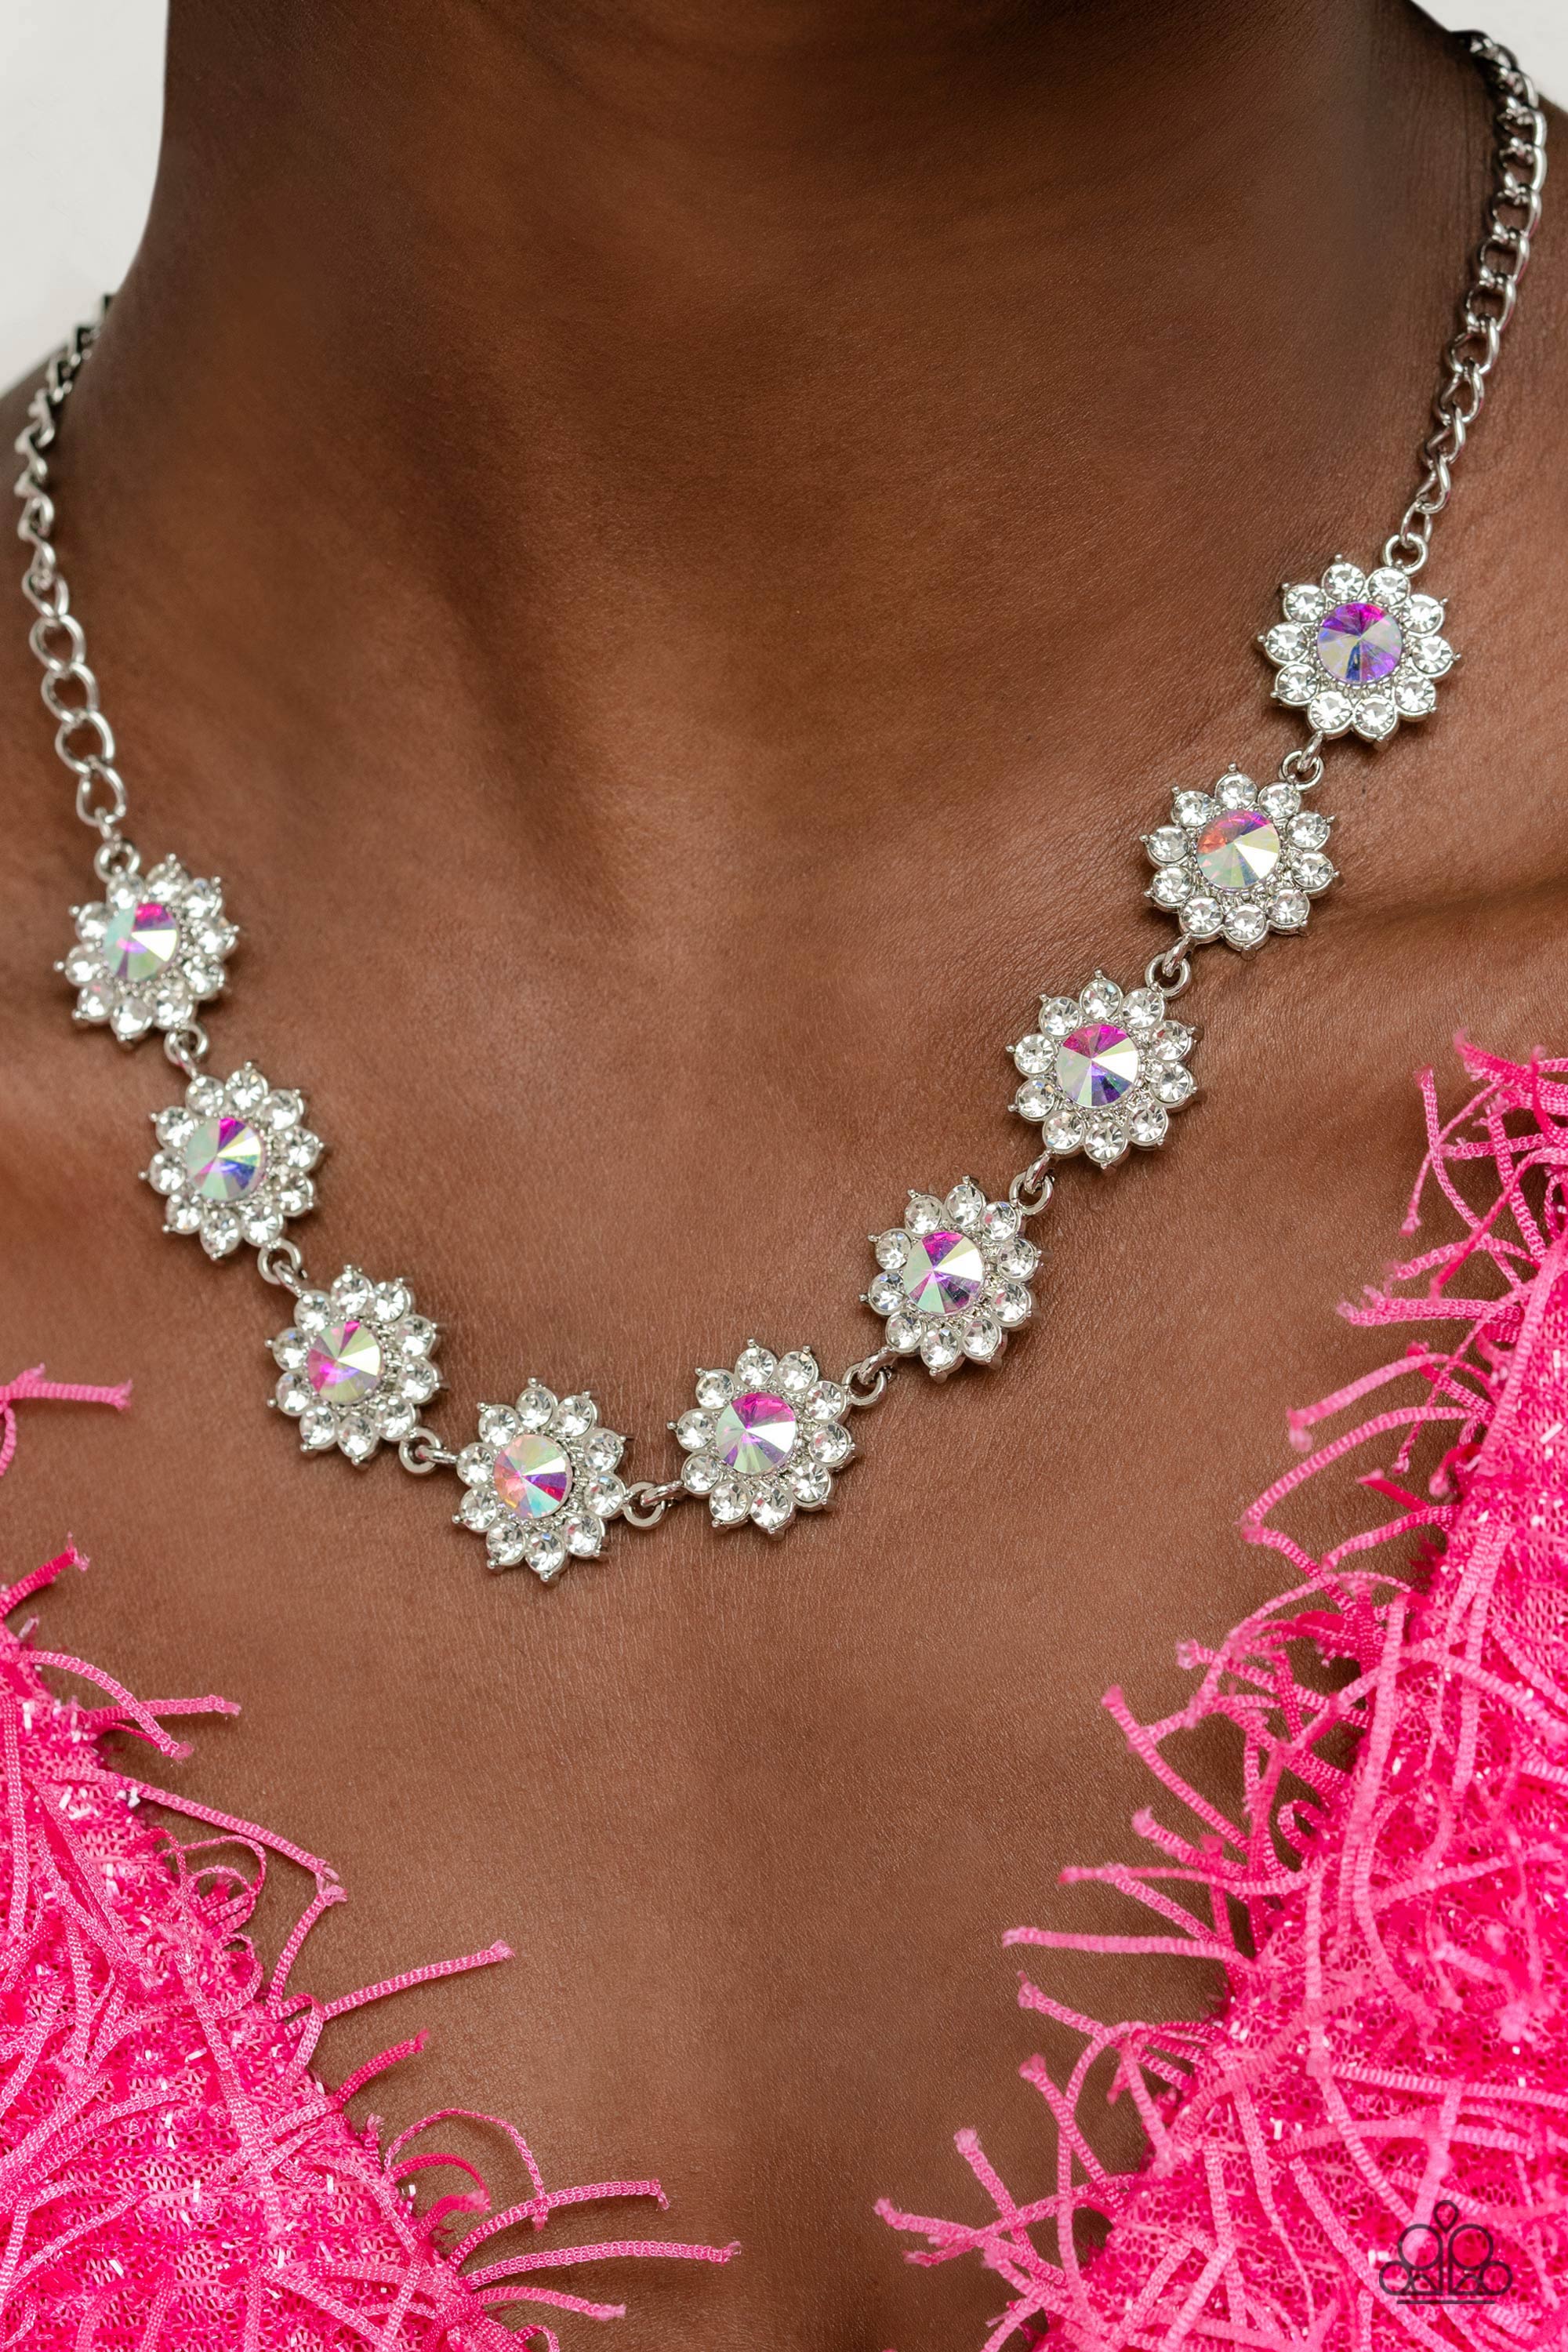 Blooming Brilliance Multi Iridescent Rhinestone Necklace - Paparazzi Accessories- lightbox - CarasShop.com - $5 Jewelry by Cara Jewels